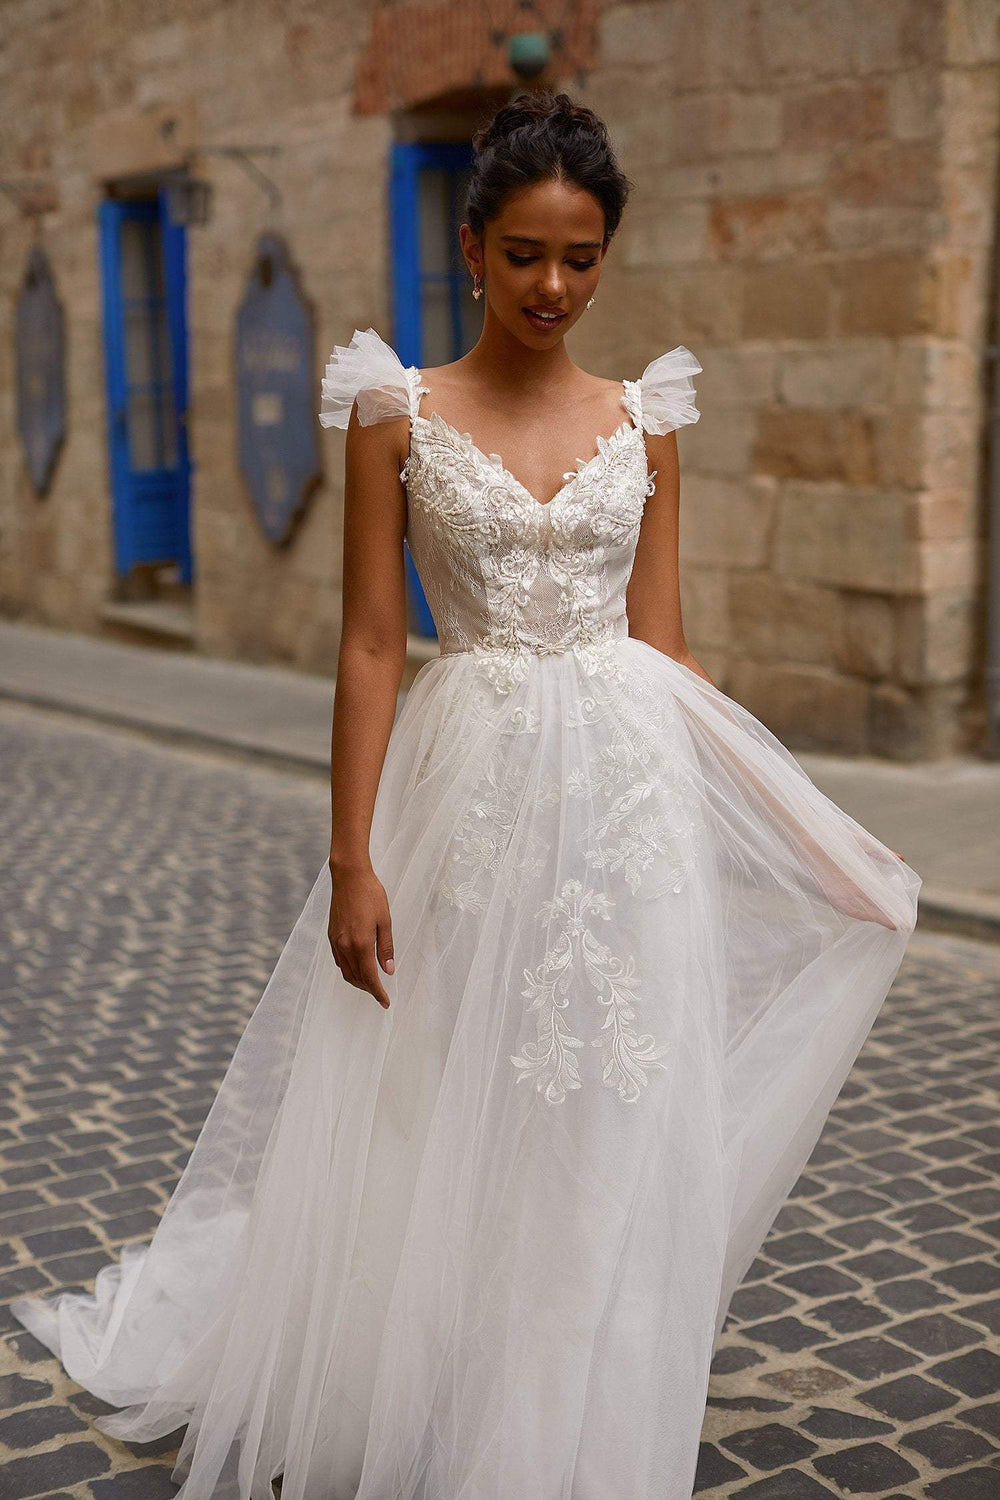 A&N Chrysie - White Boho Bridal Gown with Pearls & Short Sleeves